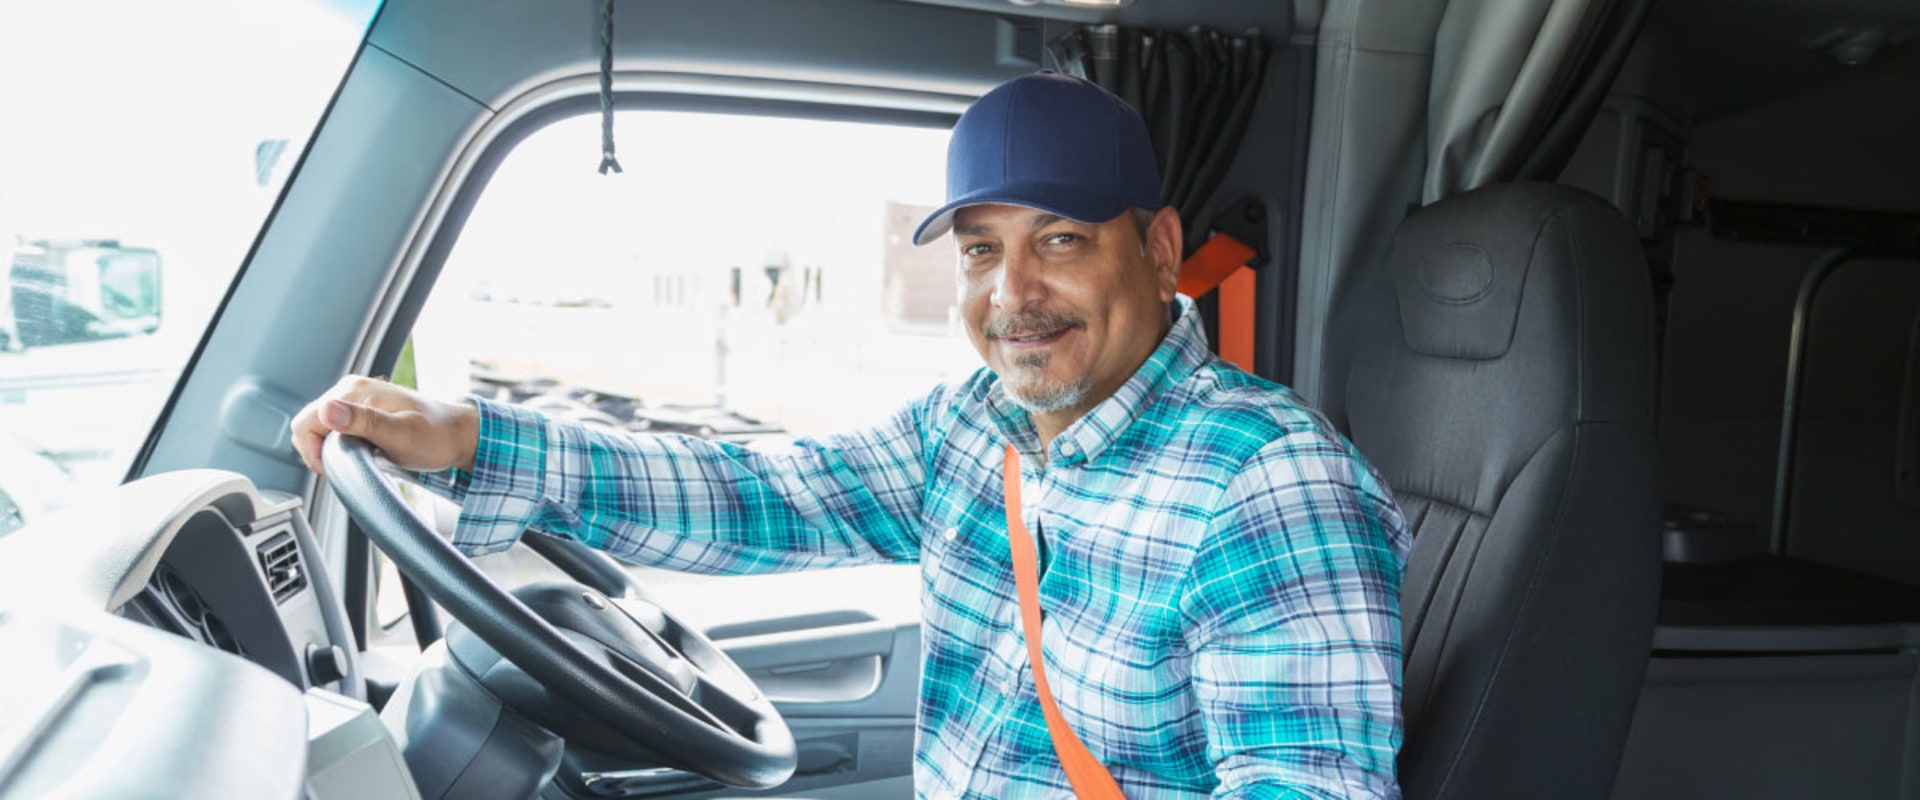 How Fuel Cards Mobile Tools Help Track Expenses For Your Truck Rental Business